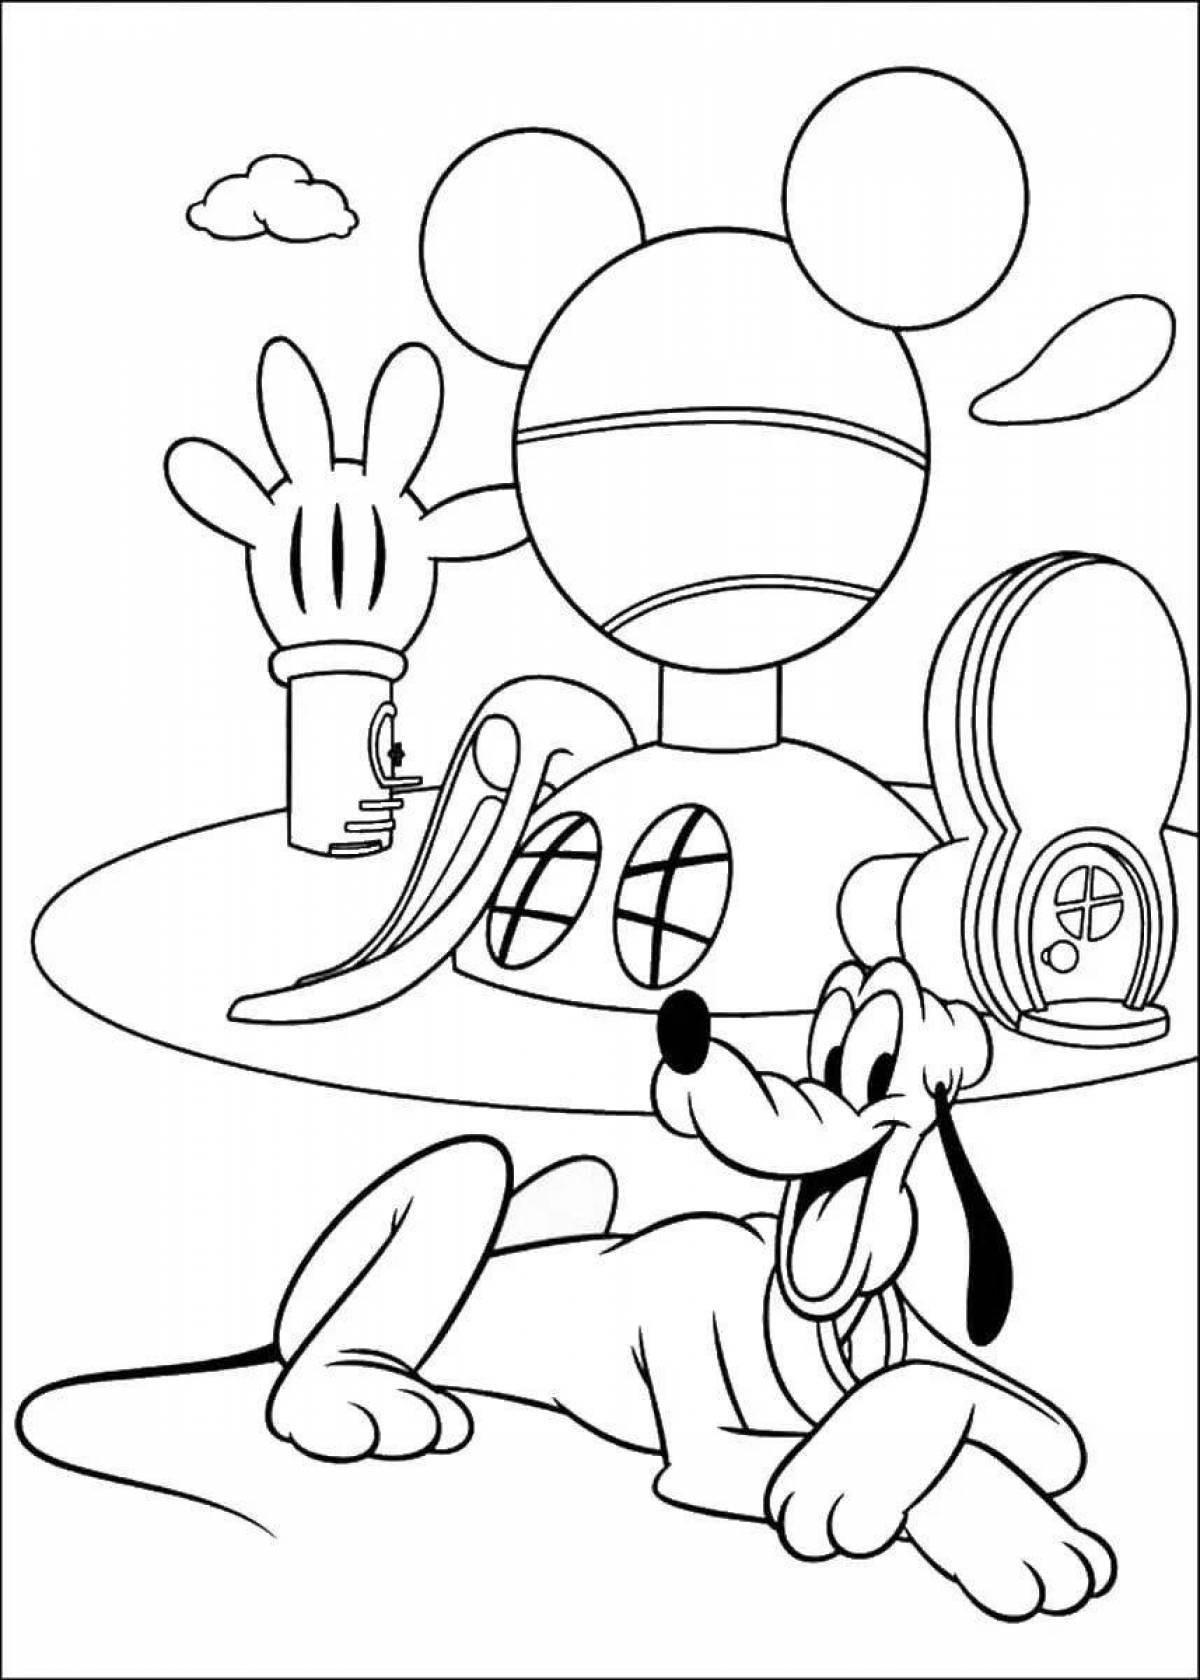 Fancy coloring mickey mouse club